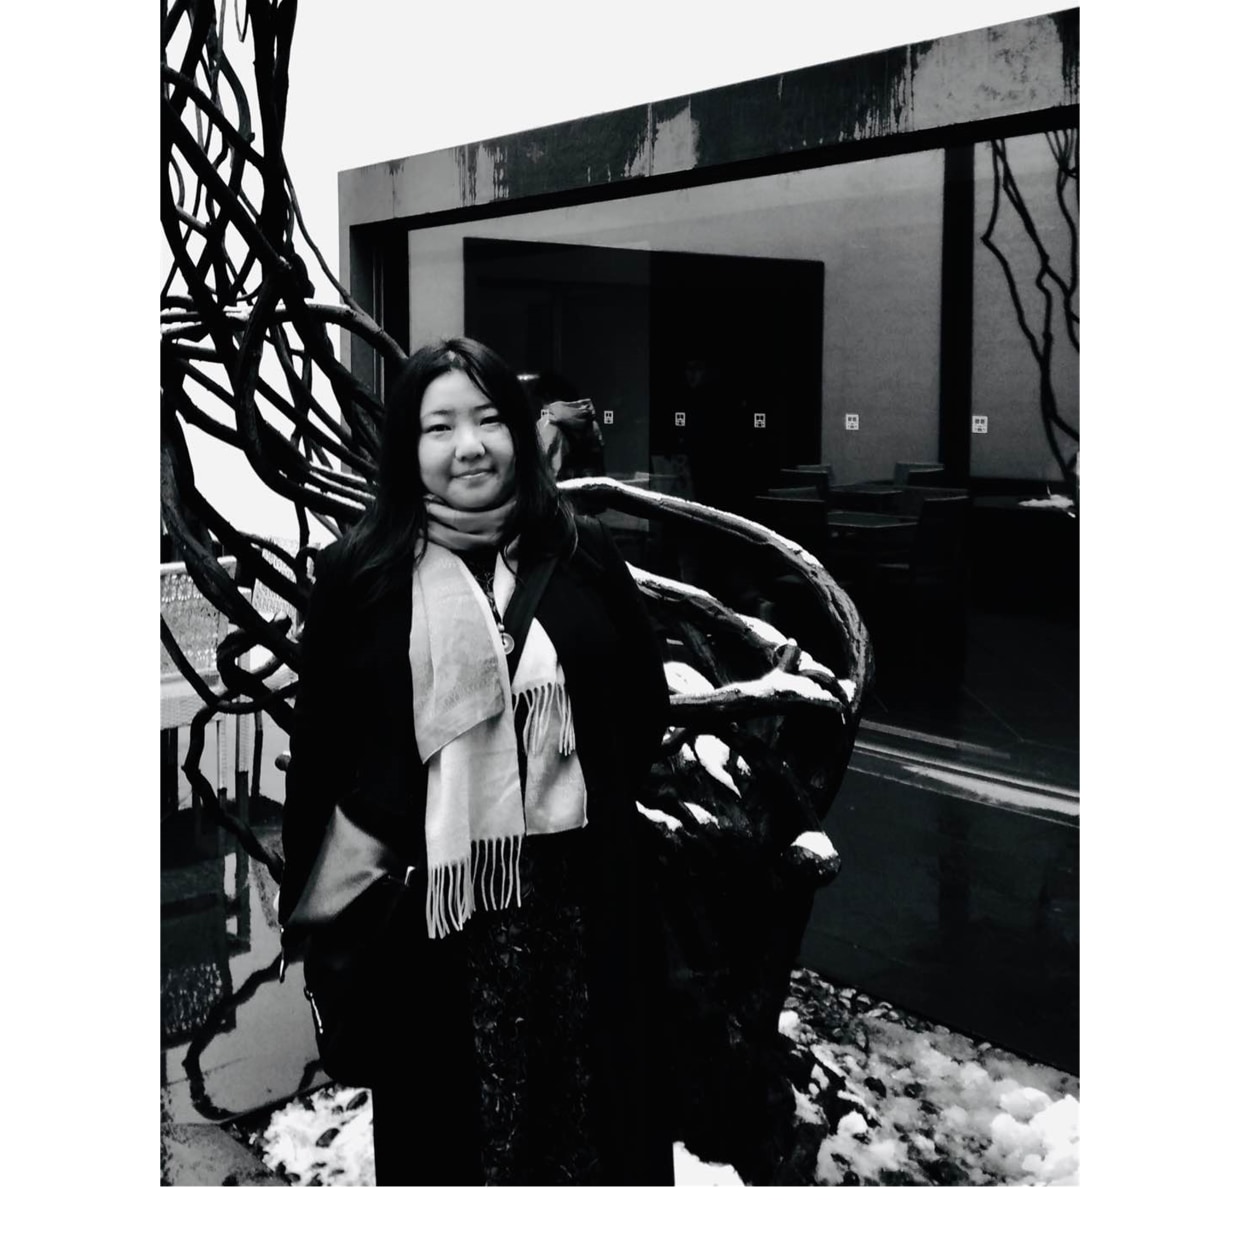 CURATOR: Yao Siqing She studied at the Central Academy of Fine Arts (MA in Art History) and the Department of...